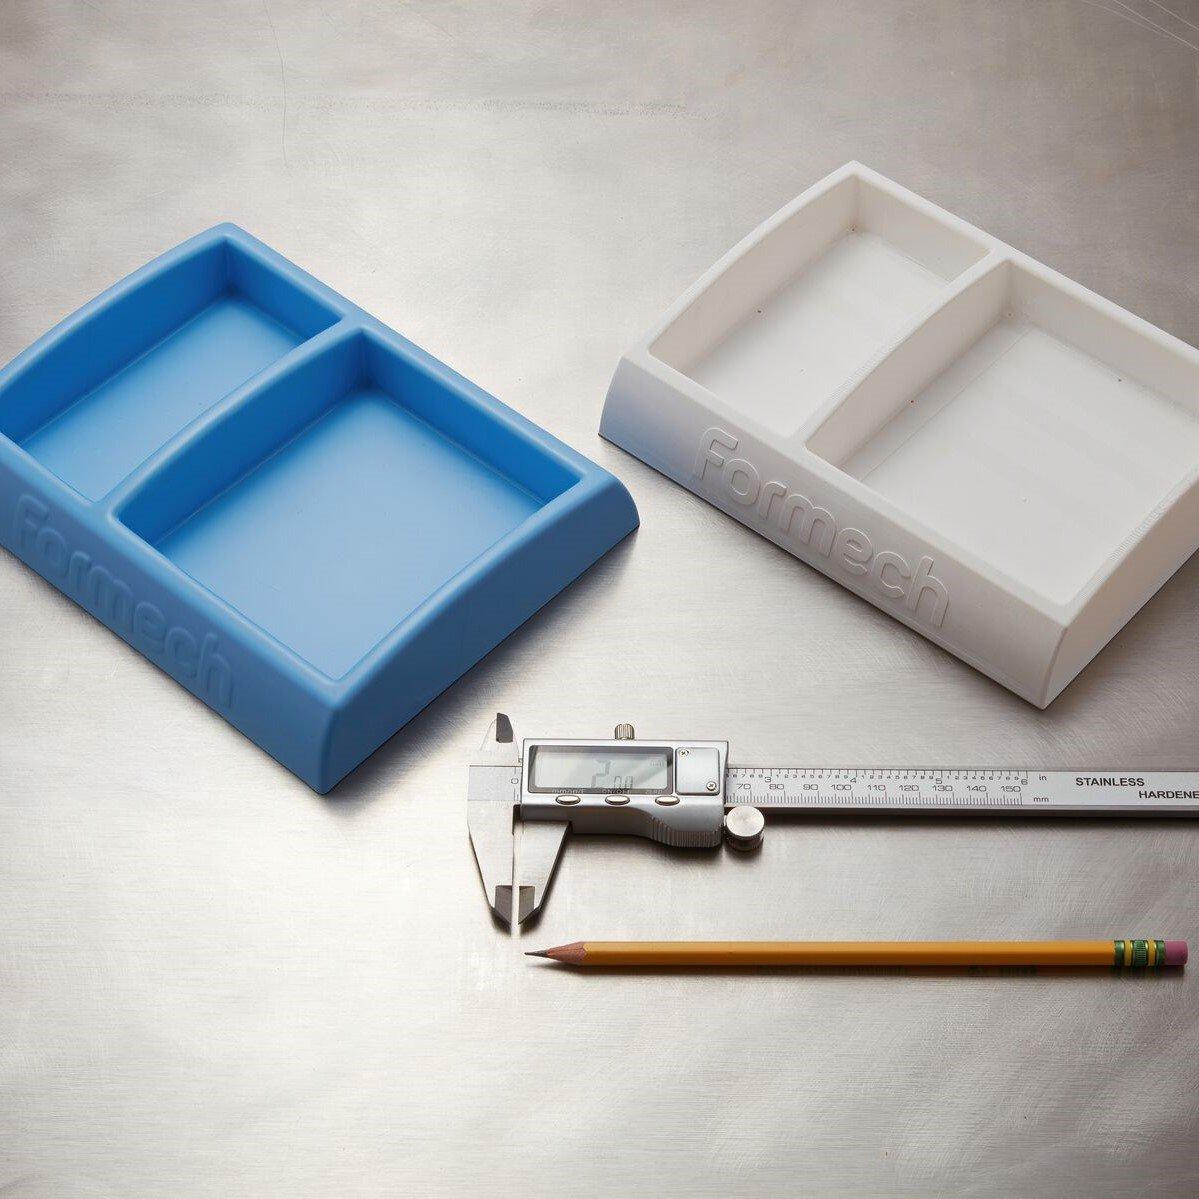 Silicone Sheets For Thermoforming Of Solid Surfaces And Composites